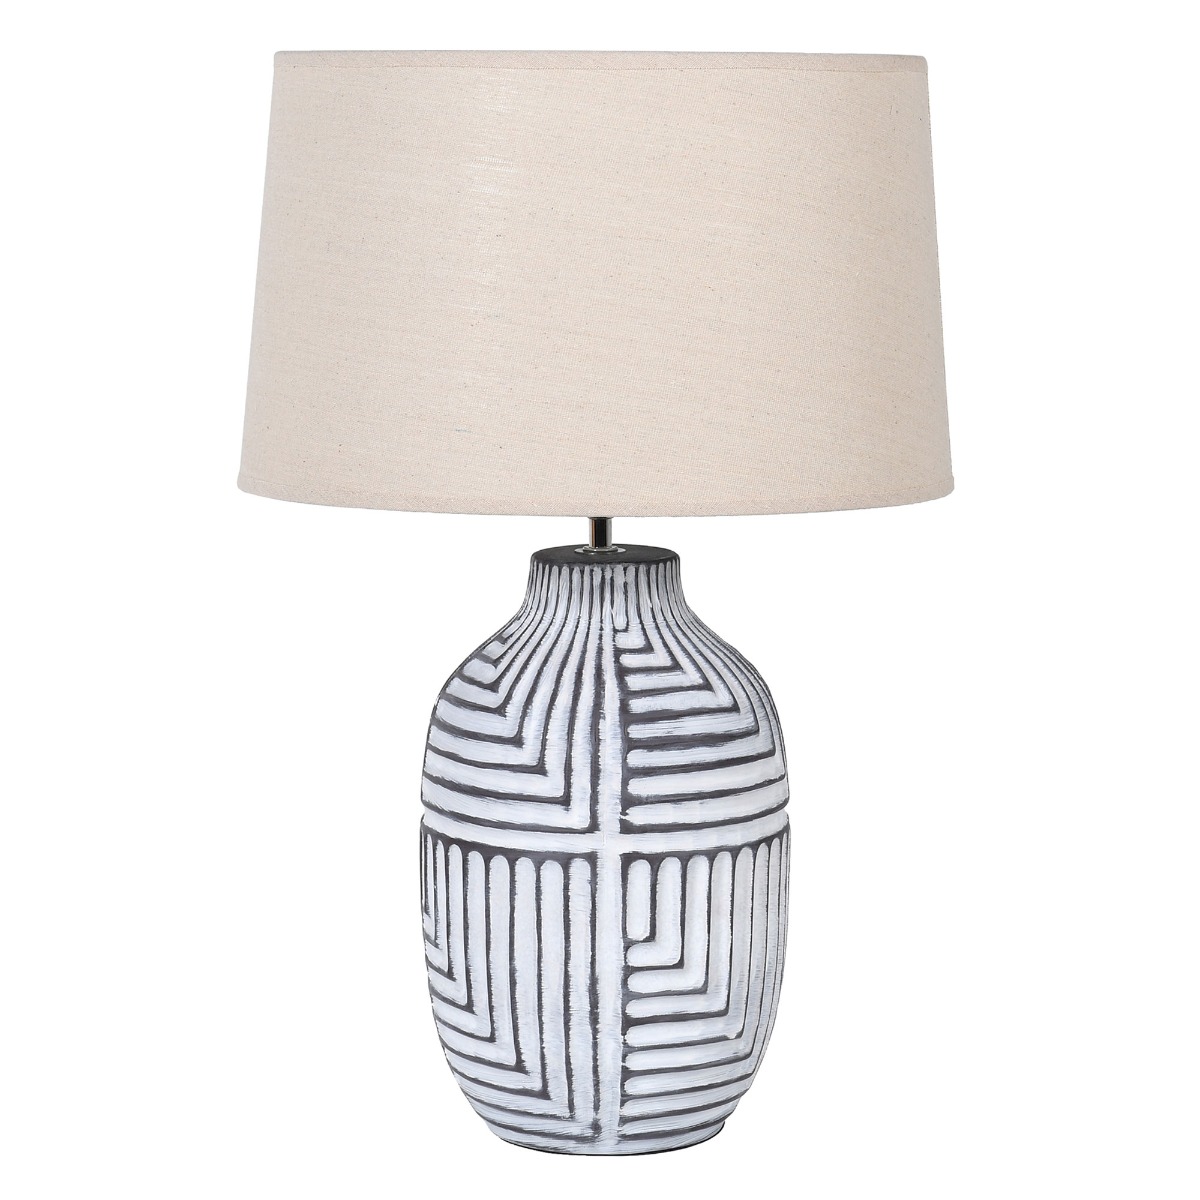 Abstract Table Lamp | Barker & Stonehouse